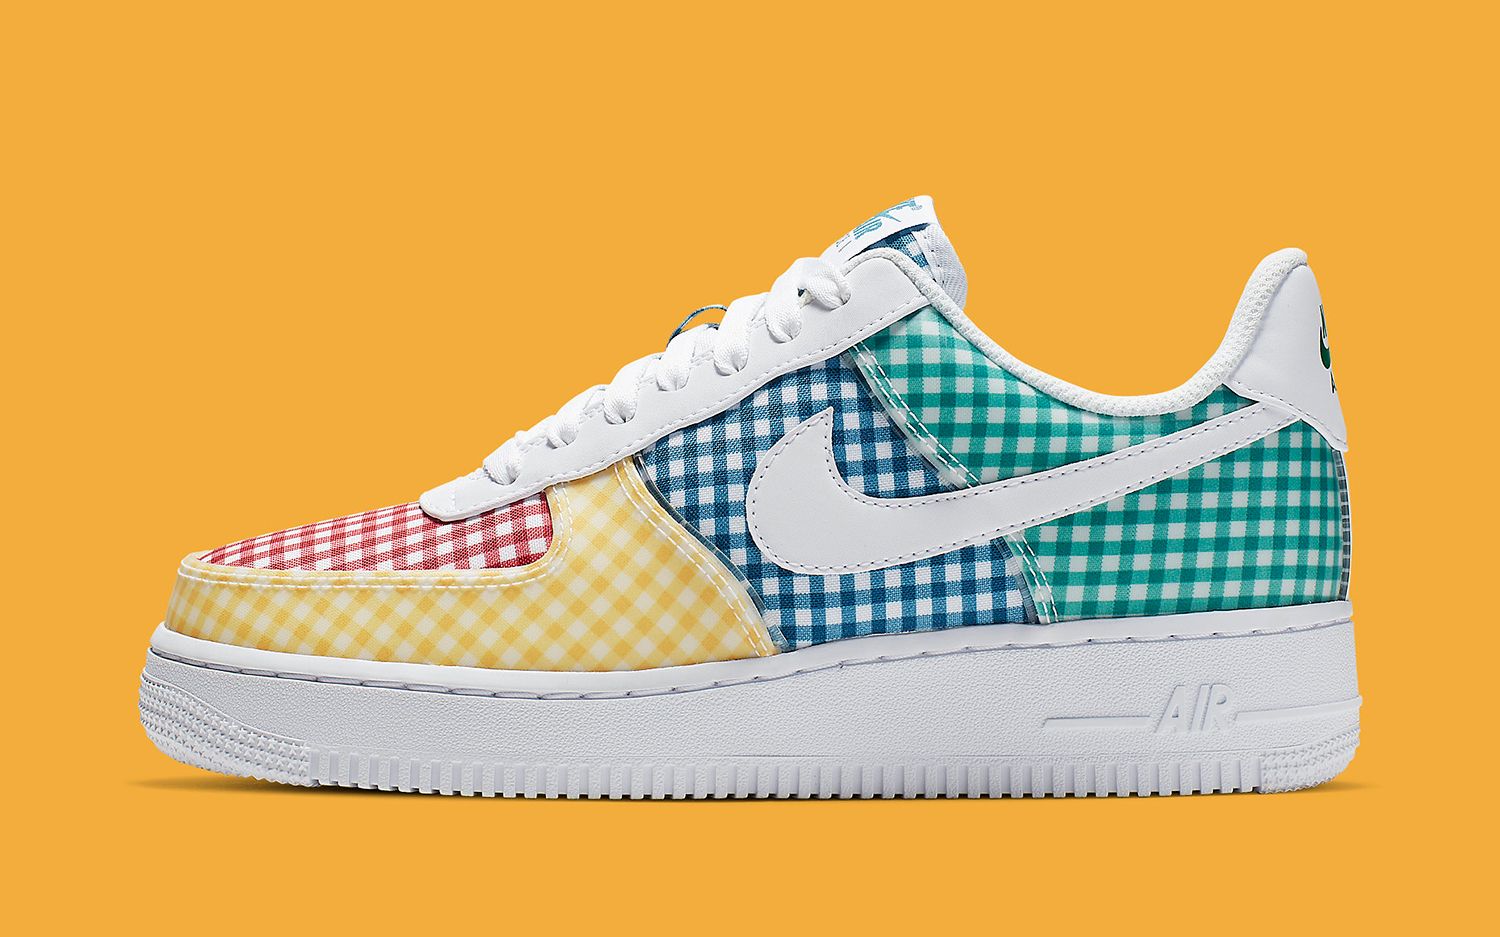 Nike to Drop a Two-Piece Gingham Pack of Air Force 1 Lows